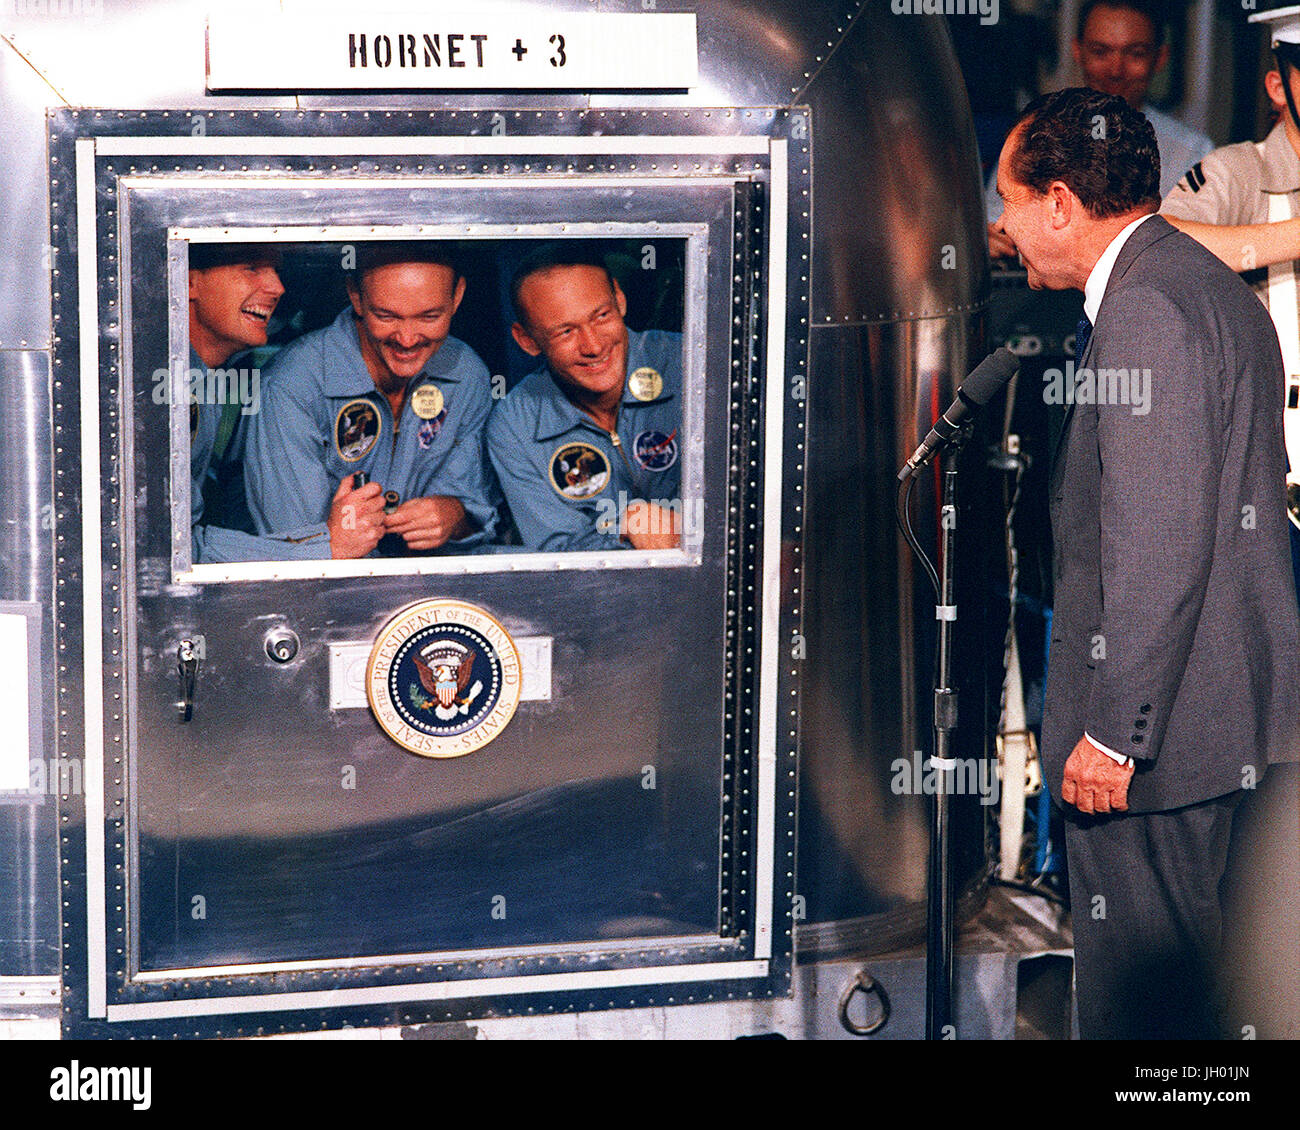 President Richard M. Nixon welcomes the Apollo 11 astronauts aboard the U.S.S. Hornet, the recovery ship for the historic Apollo 11 lunar landing mission. Confined to the Mobile Quarantine Facility (MQF) are Neil A. Armstrong, commander; Michael Collins, command module pilot; and Edwin E. Aldrin Jr., lunar module pilot. Stock Photo